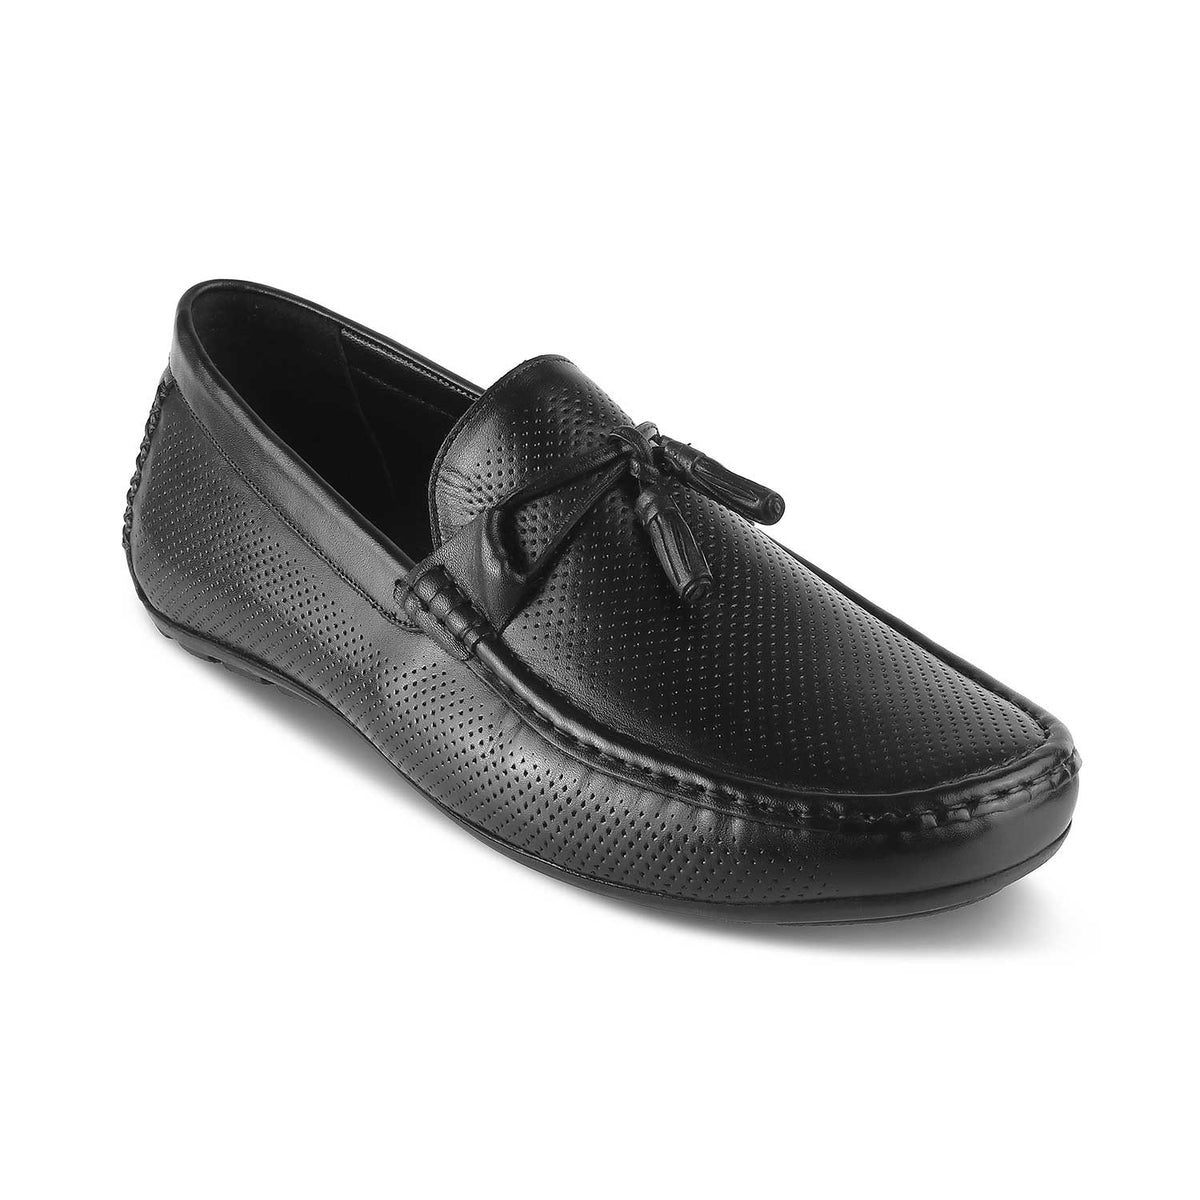 The Otie Black Men's Leather Loafers - Tresmode